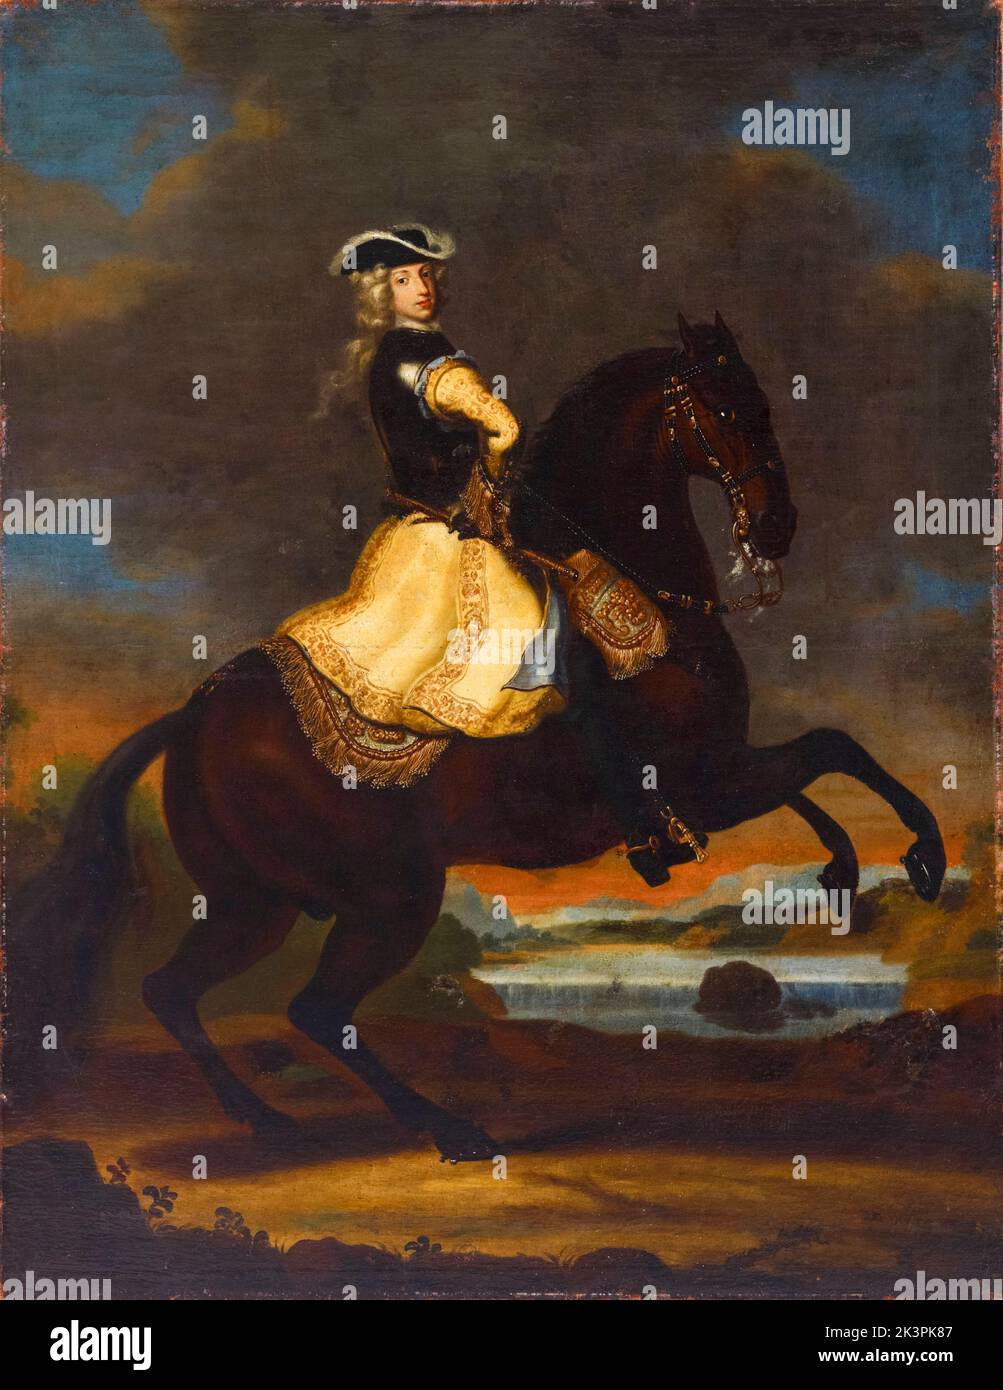 Charles XII (1682-1718), King of Sweden, equestrian portrait in oil on canvas by David Klöcker Ehrenstrahl, before 1698 Stock Photo